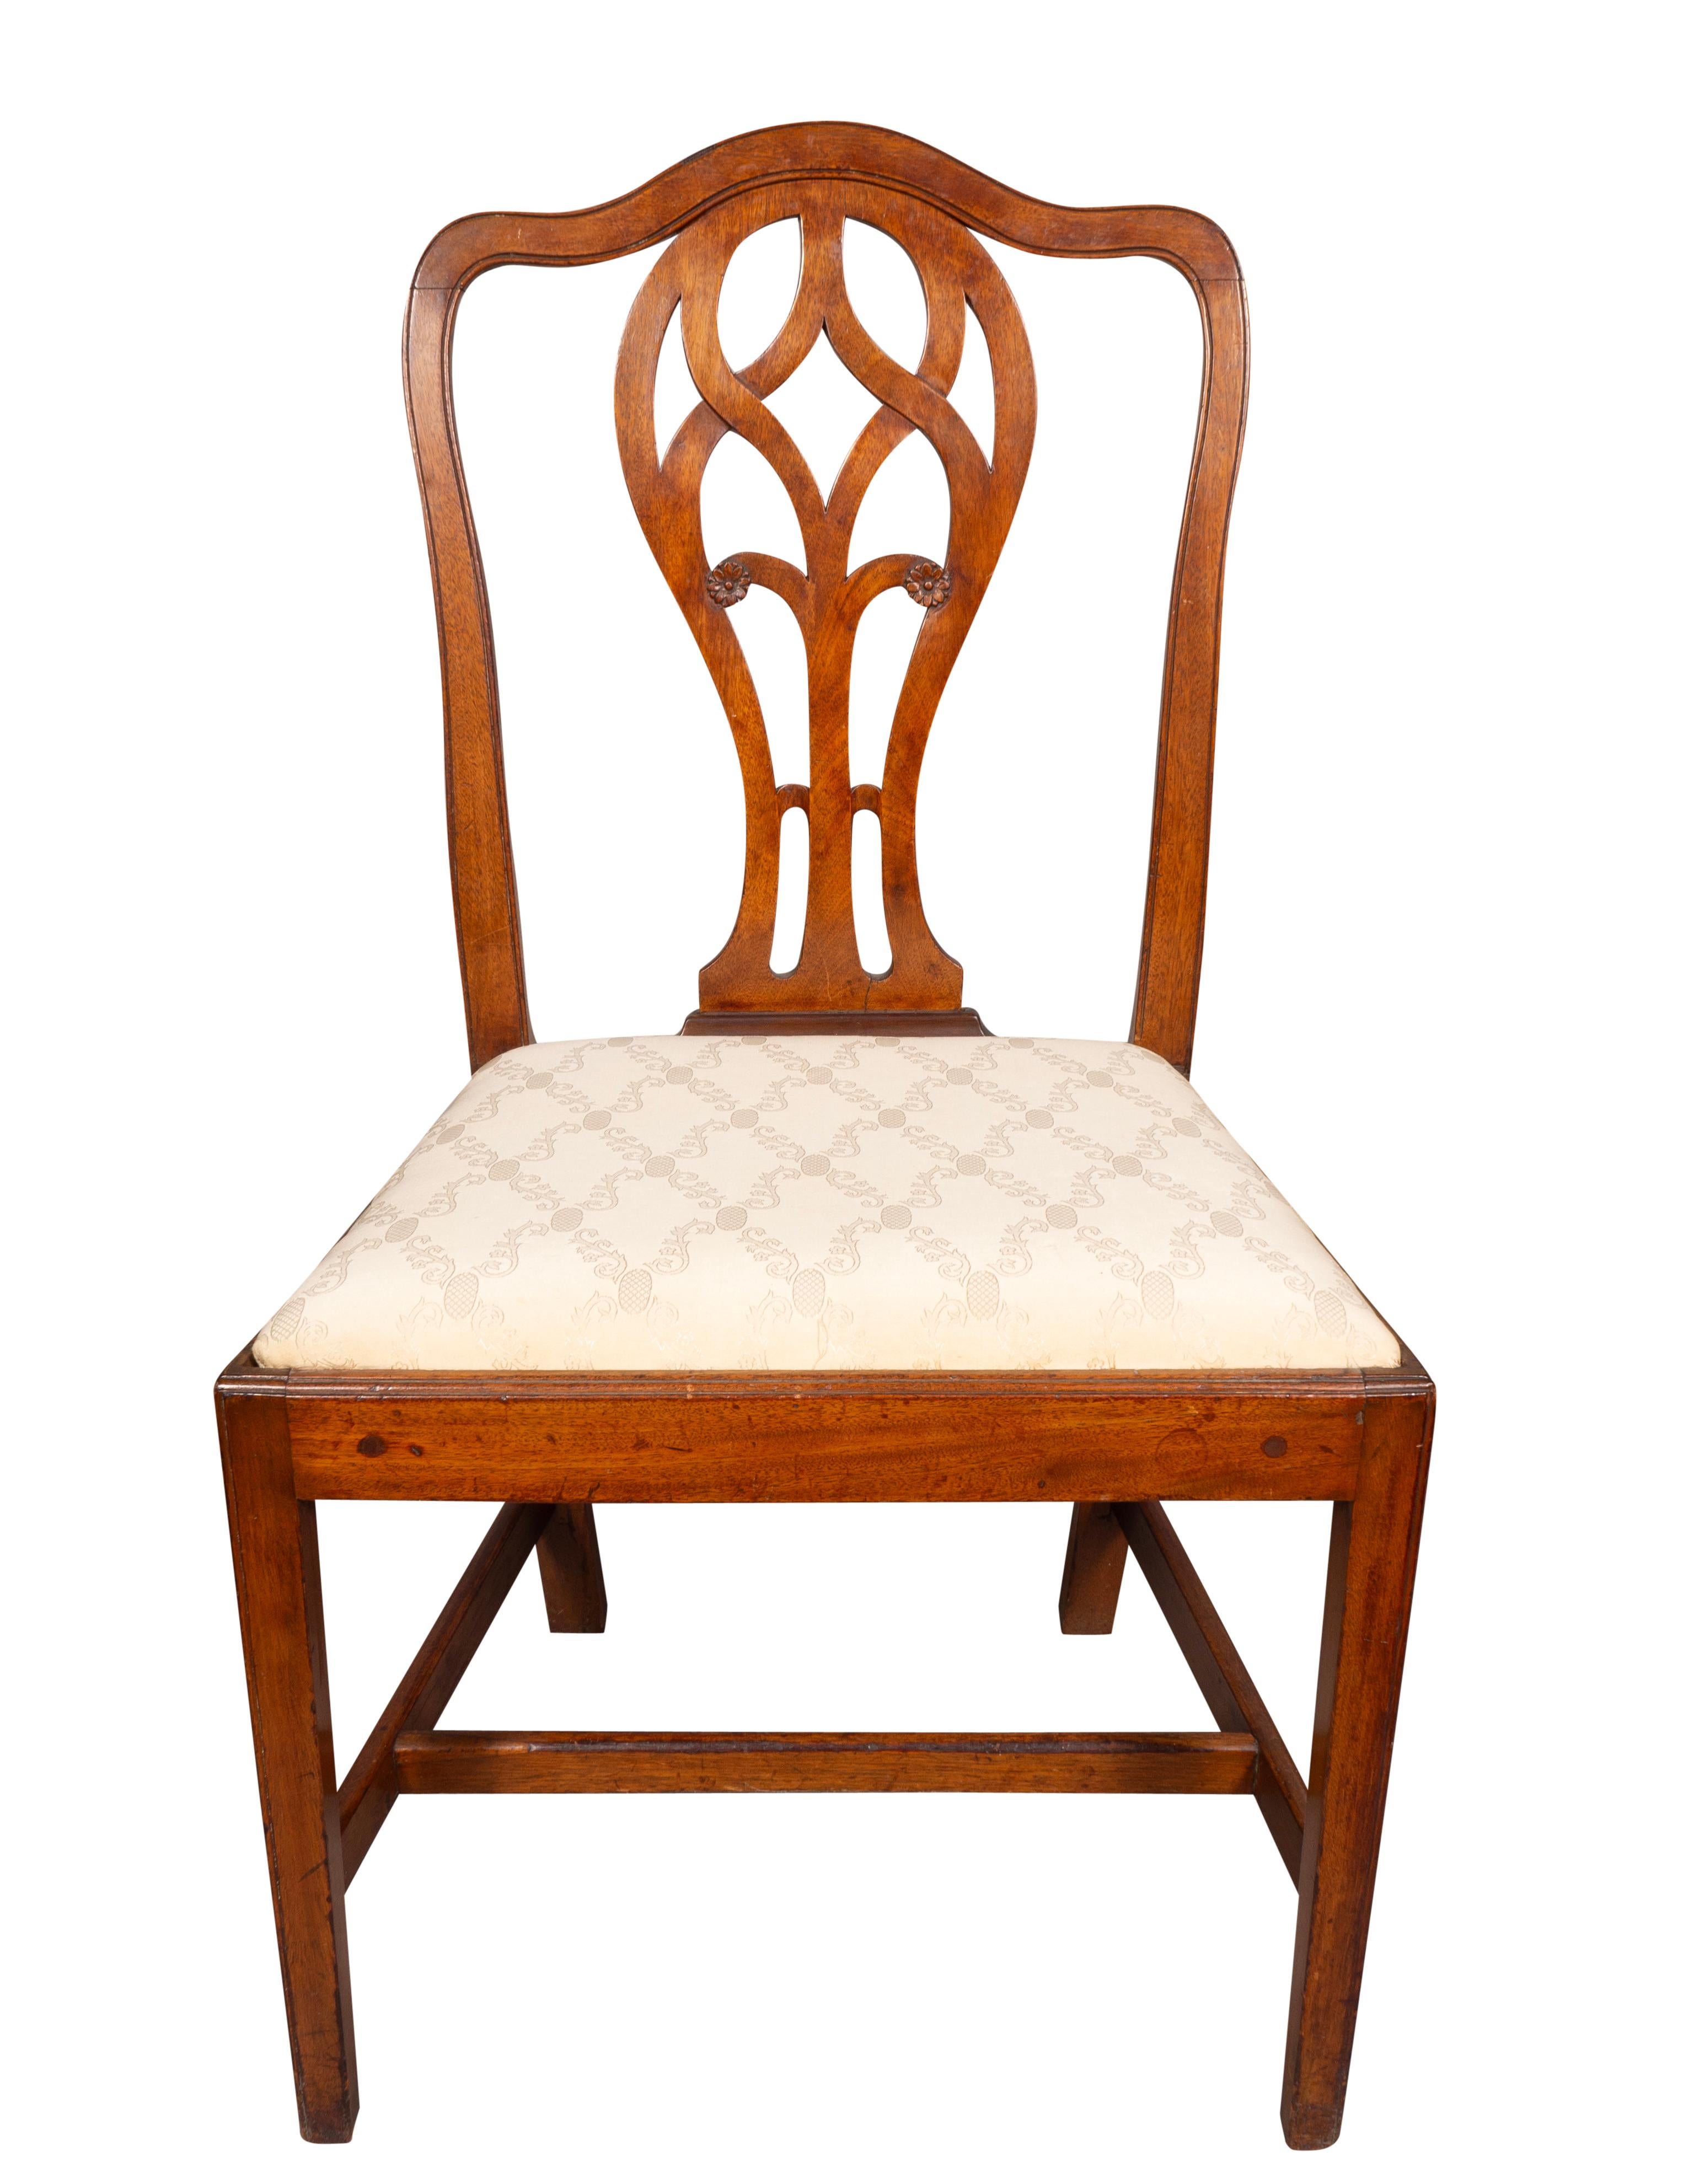 With arched backs with pierced splats with small carved rosettes. Drop in seats and raised on square tapered legs with H form stretchers.